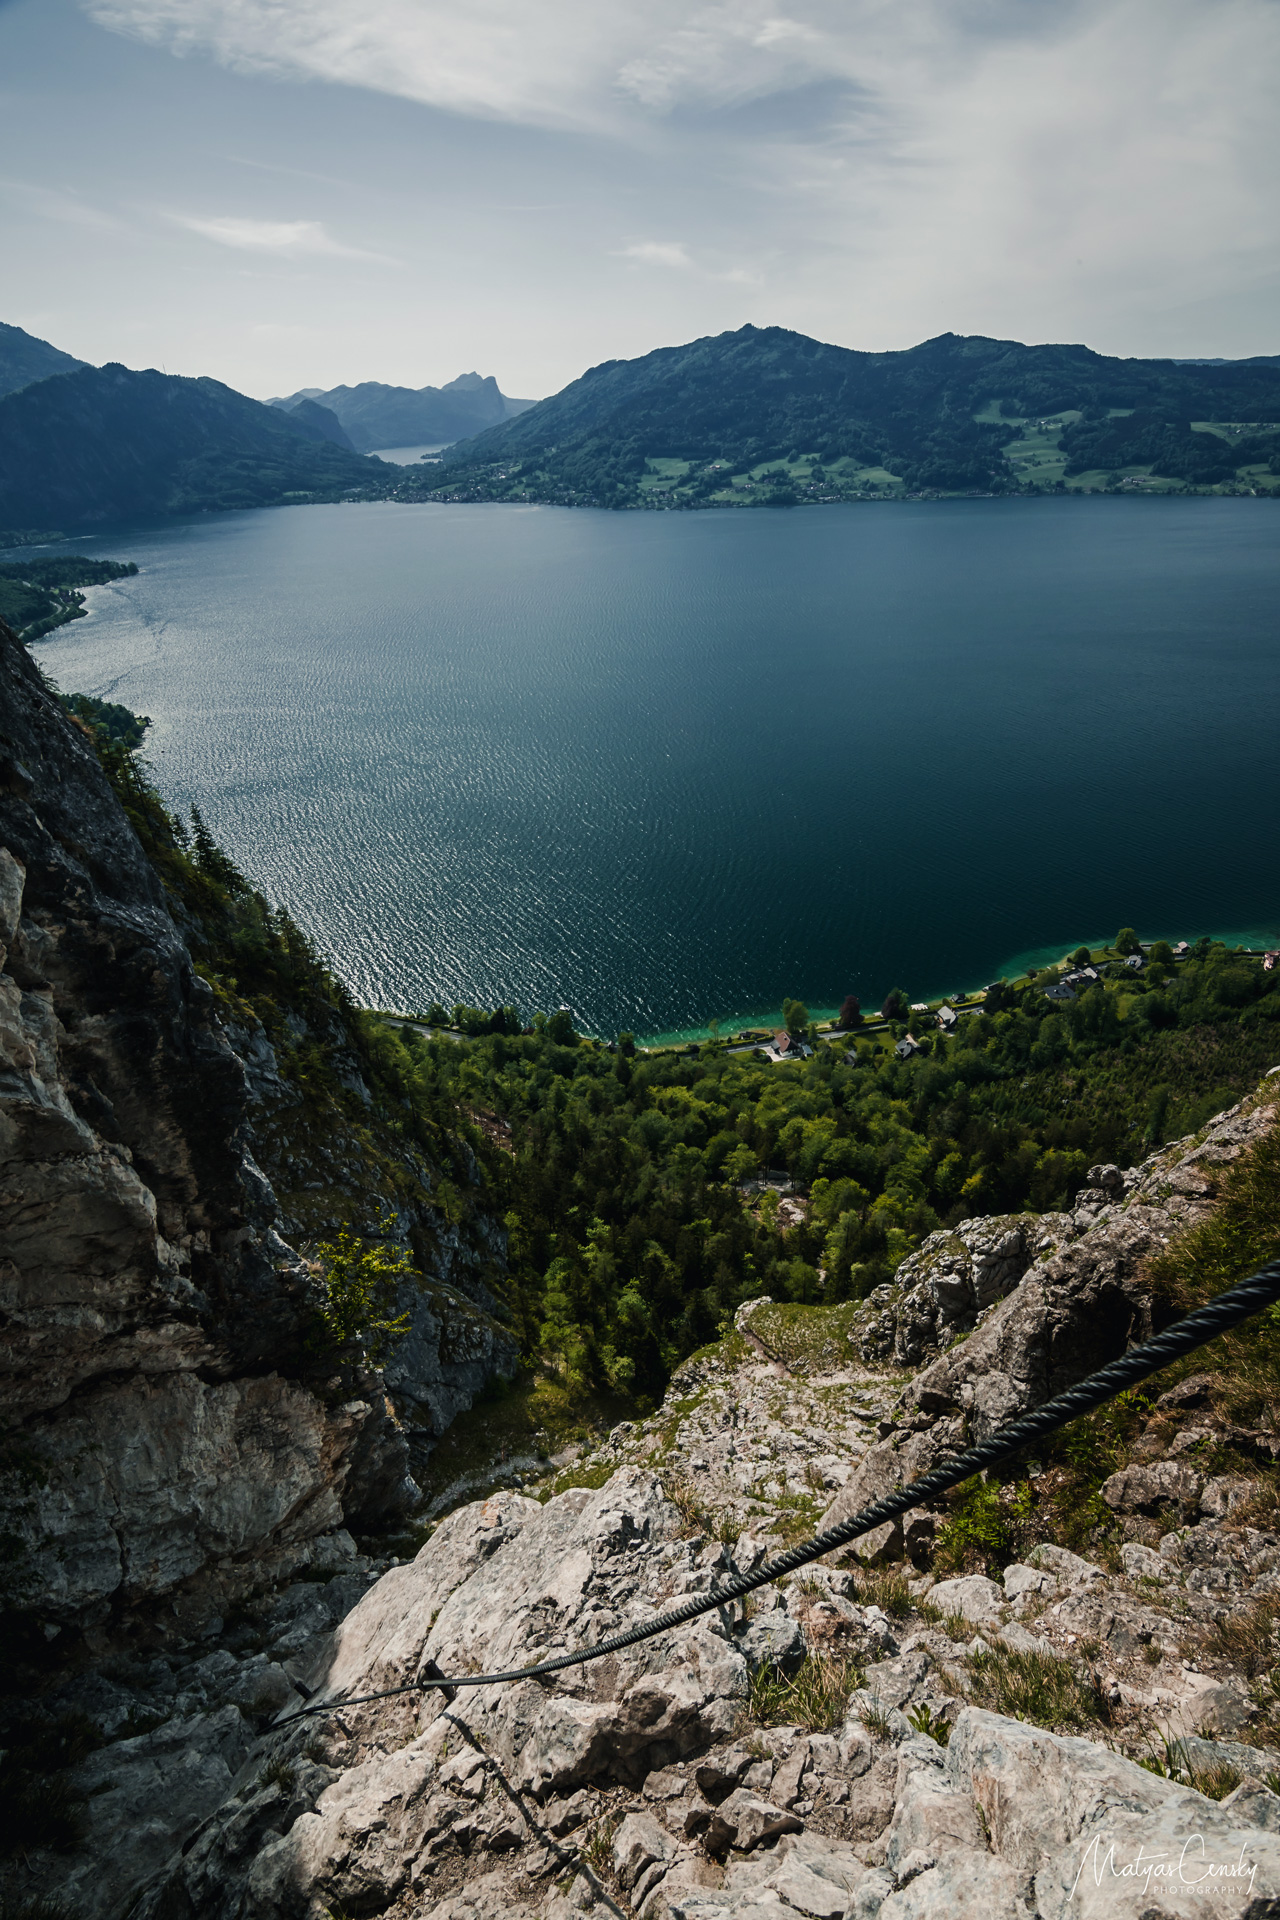 Landscape photo of Attersee in mid day from via ferrrata with a rock and fixed rope in the foreground and Mondsee in the background.